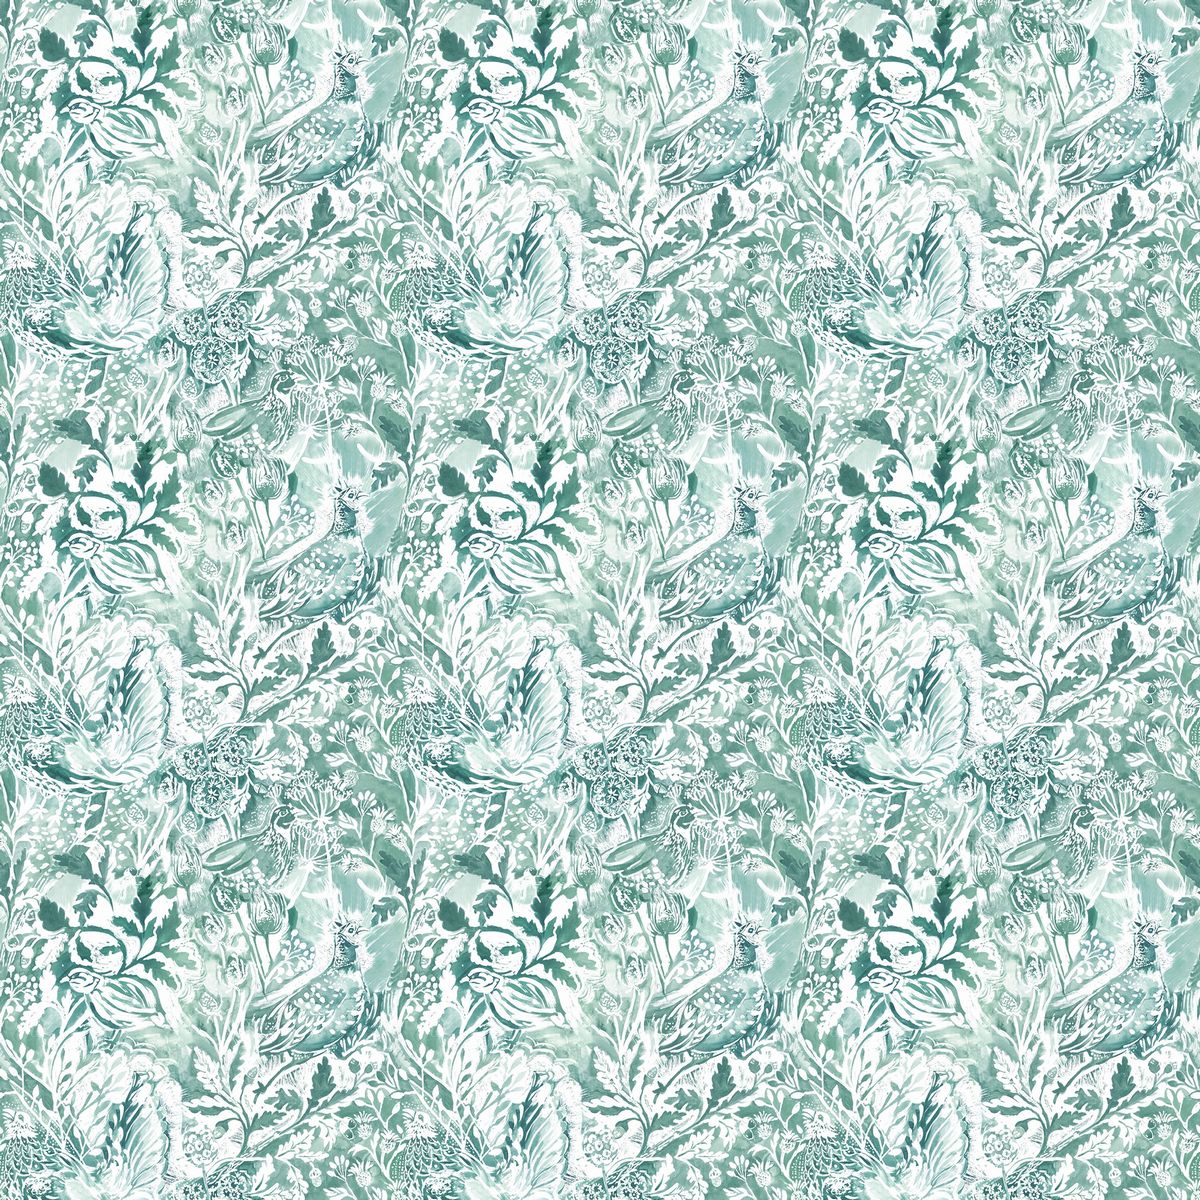 Rothesay Robins Egg Fabric by Voyage Maison